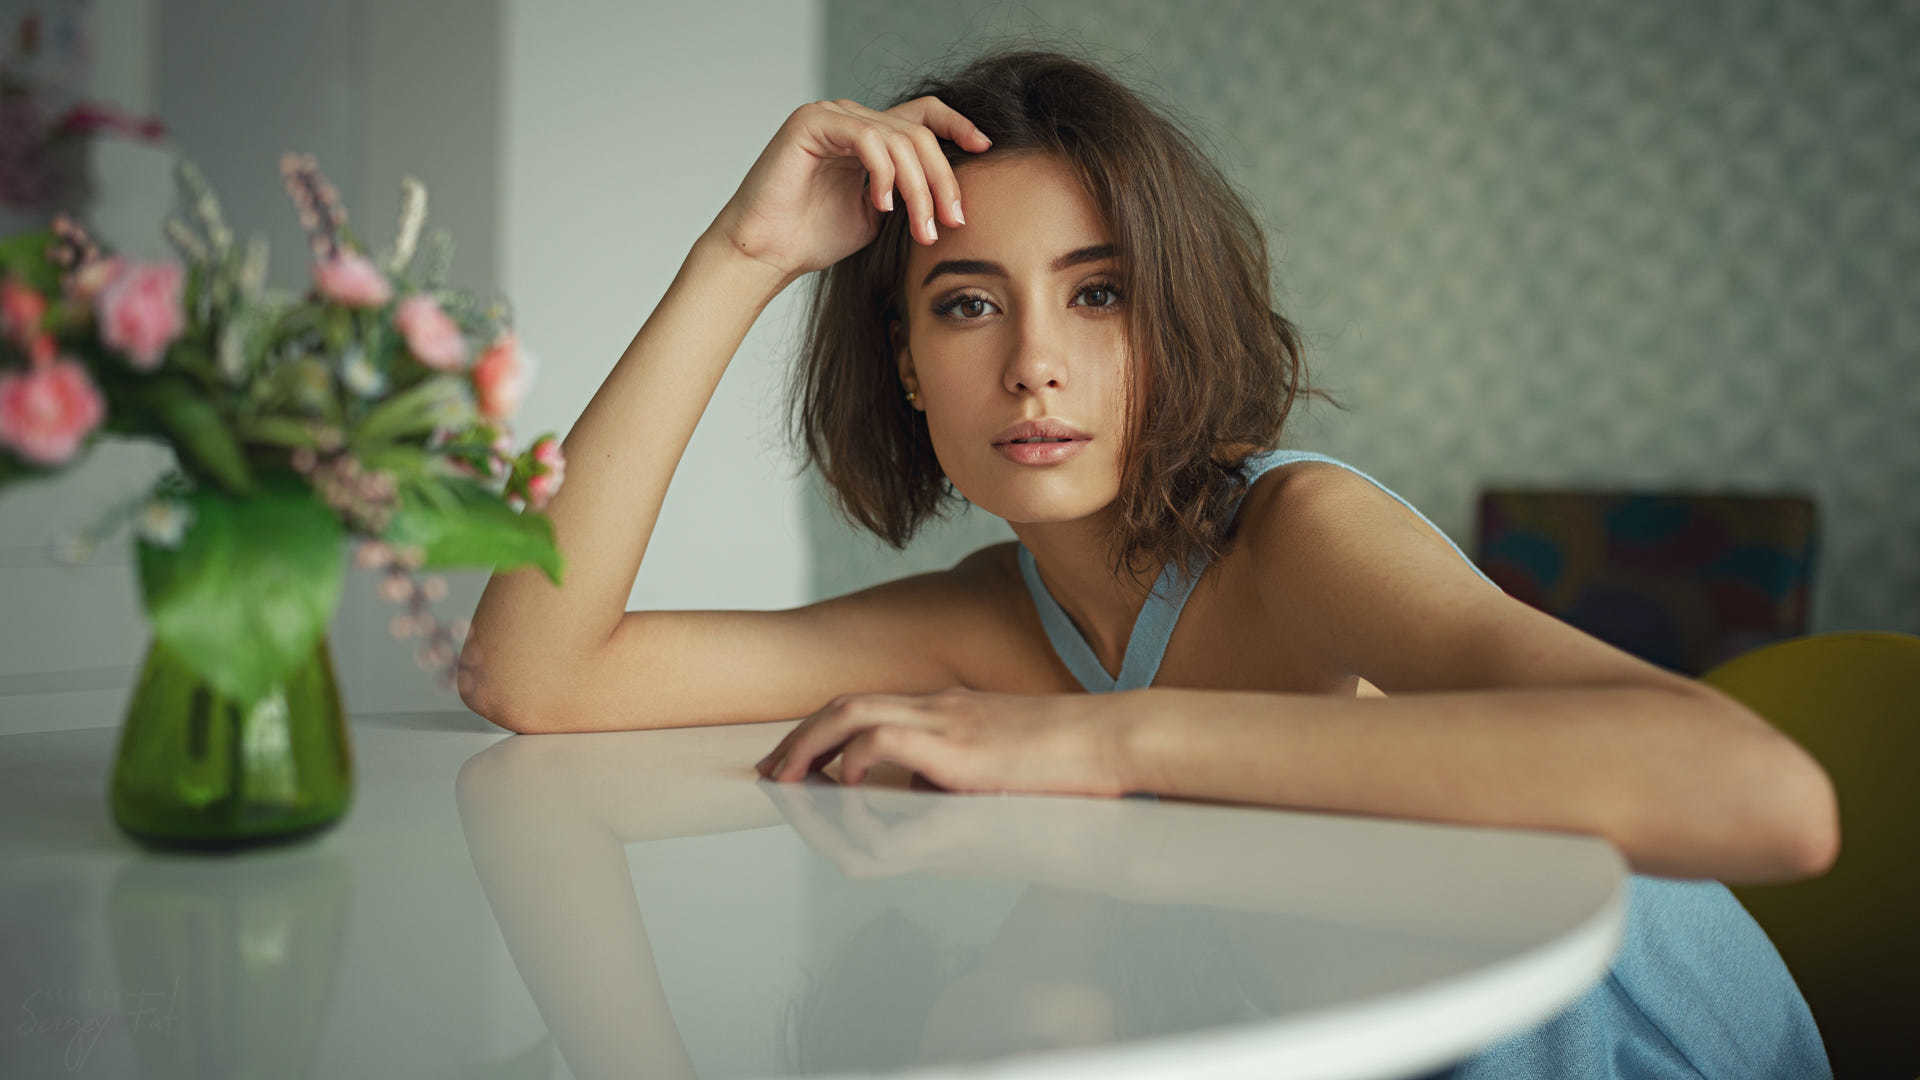 Wallpaper Relaxed, leaning to table, girl model